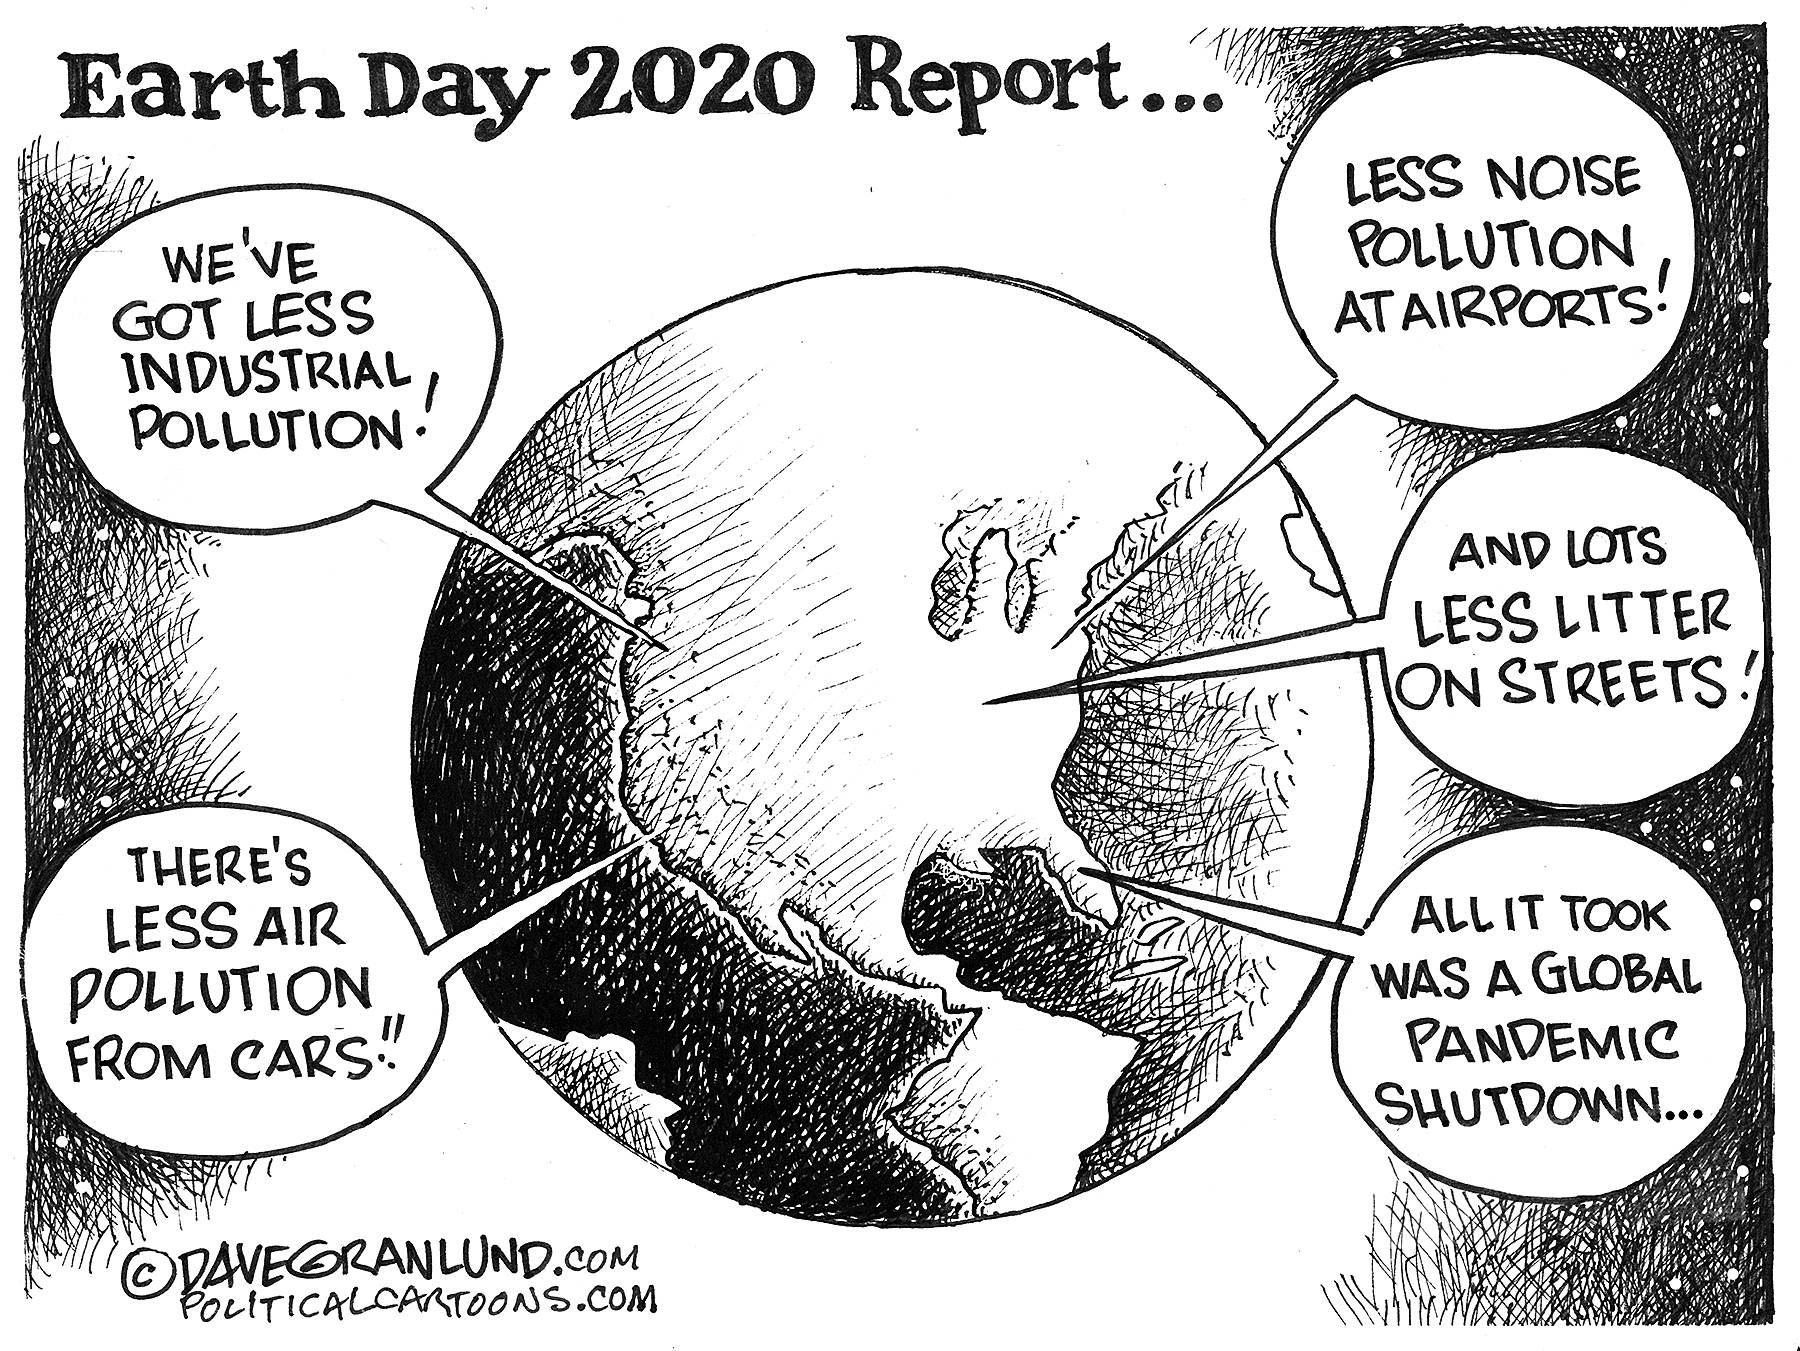 Earth Day 2020 report by Dave Granlund, PoliticalCartoons.com